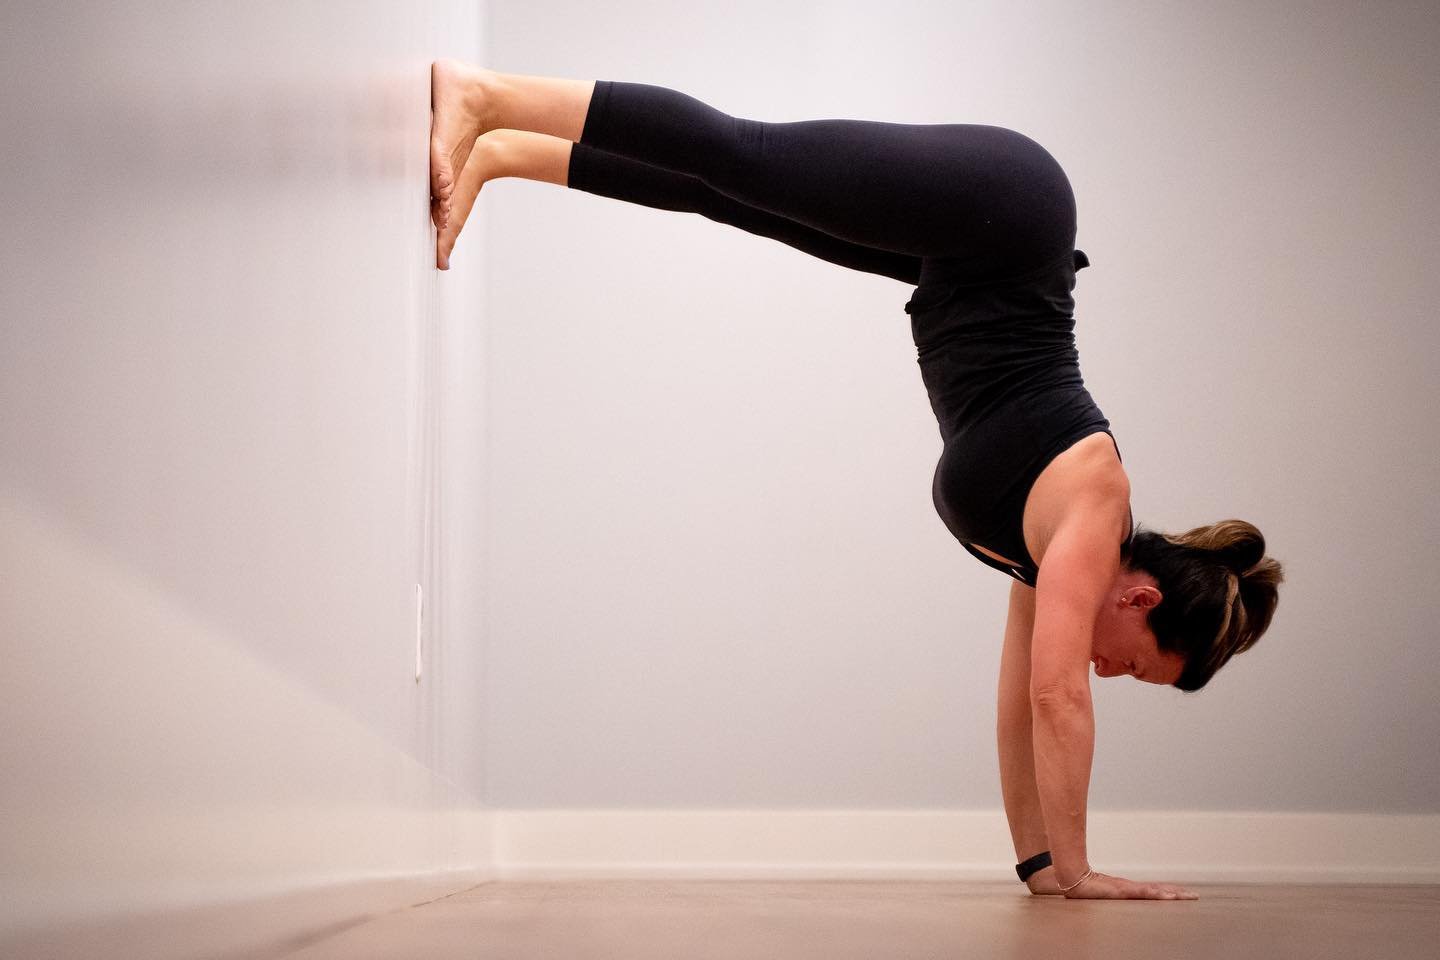 WEEKEND PLANS ➡️ // Spend your weekend with us! This Saturday, Cindy is hosting a Wall Flow workshop that will inspire you to see and experience your practice in a new way. You&rsquo;ll flow, be introduced to inversions, and soften into Yin poses, al